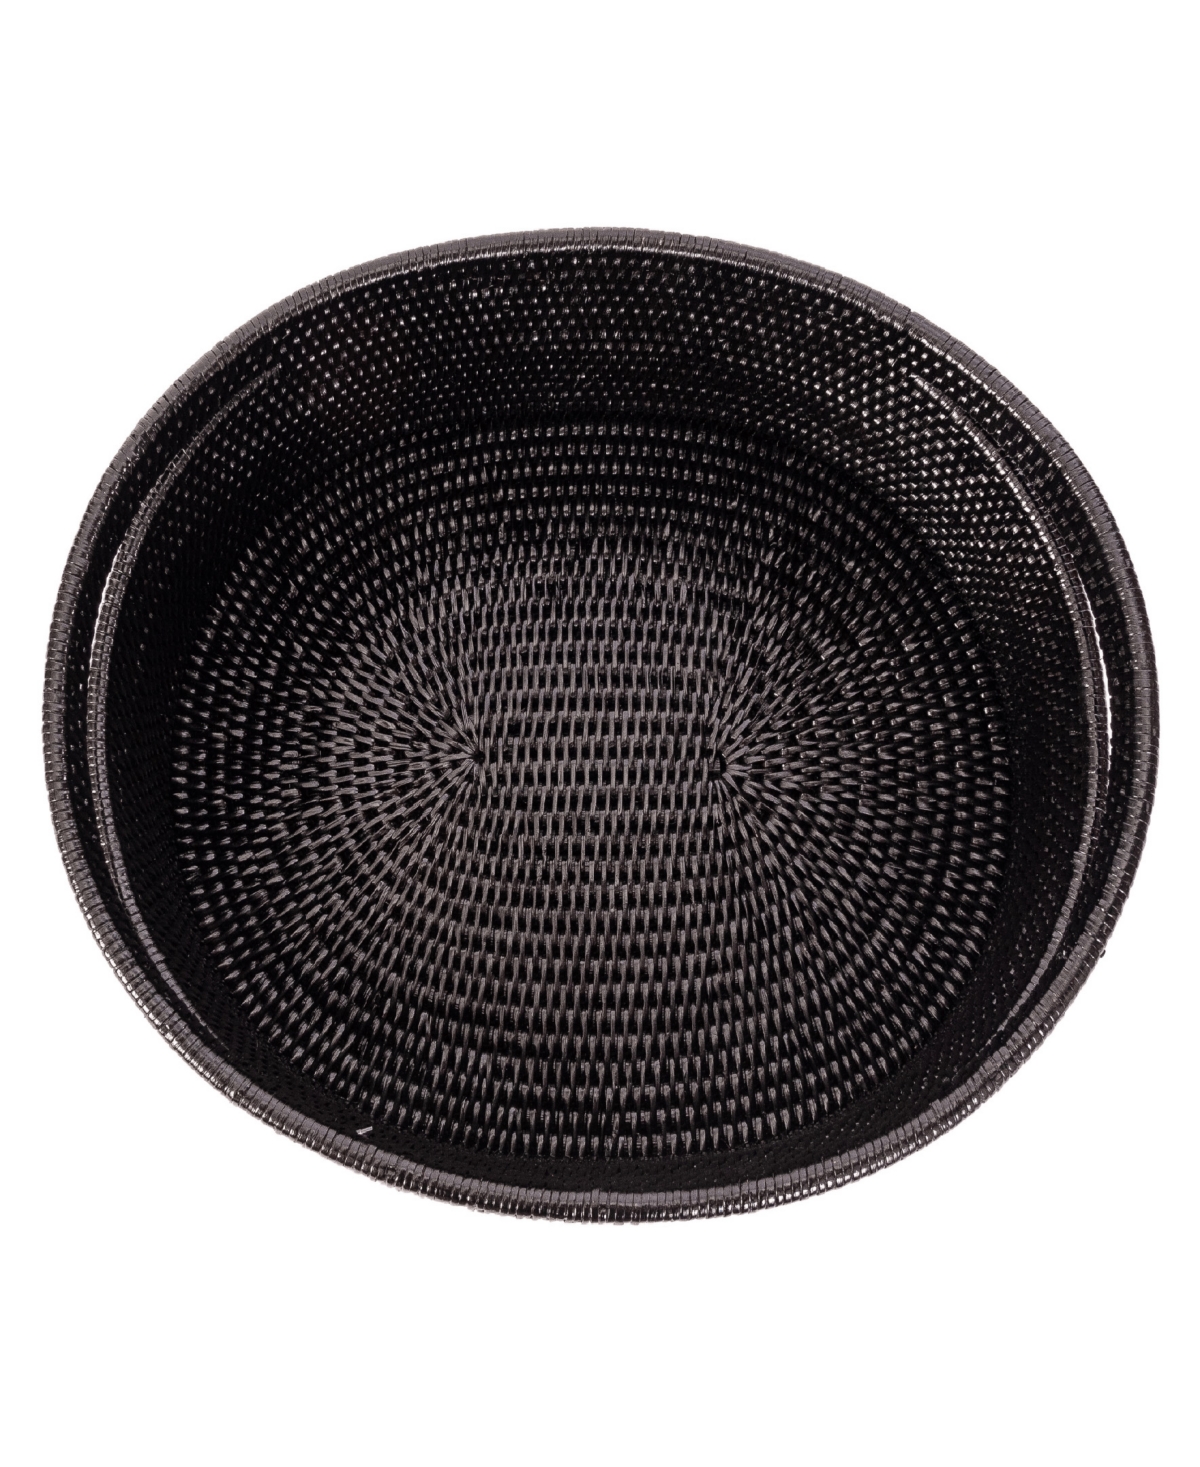 Artifacts Trading Company Artifacts Rattan Oval Basket In Tudor Black